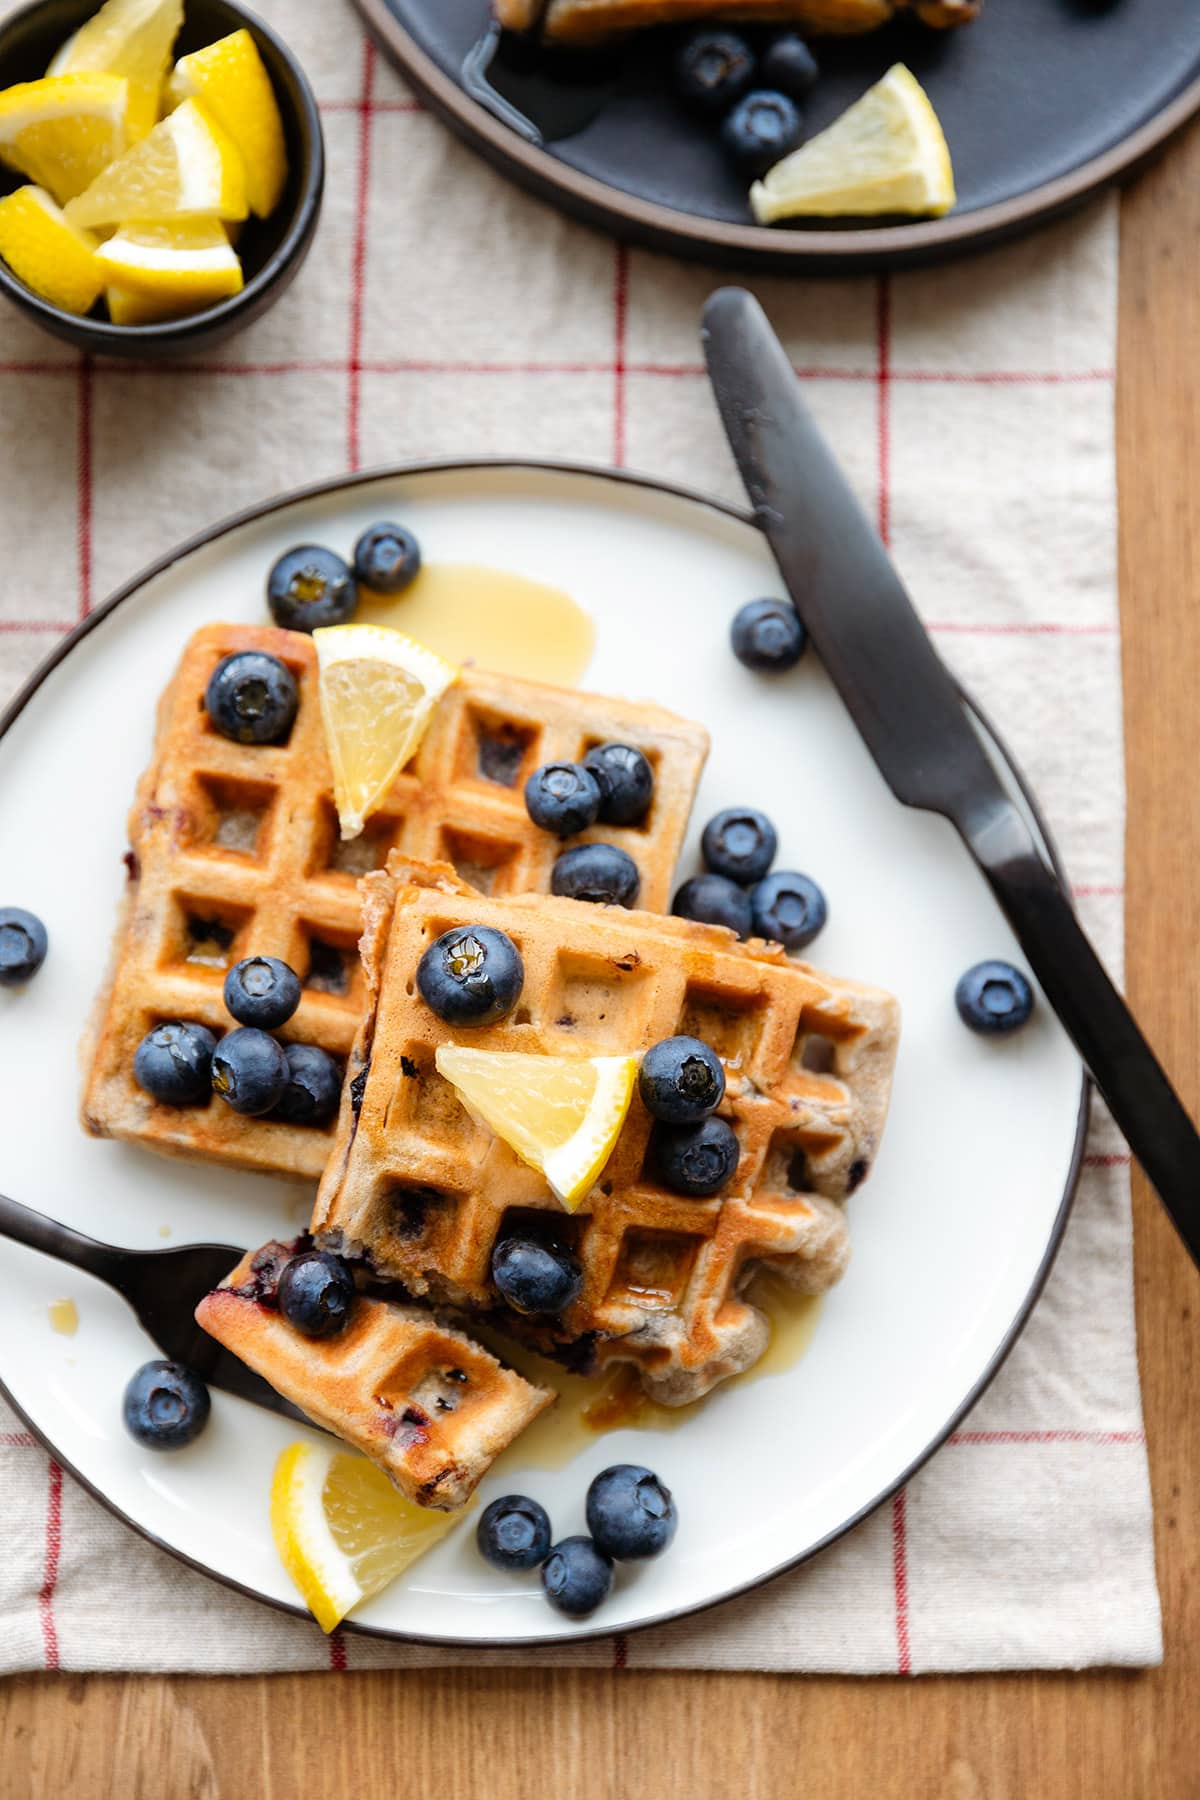 Waffles with blueberries and lemon slices on a white and black plates and a wooden table with fork and knife cutting in.